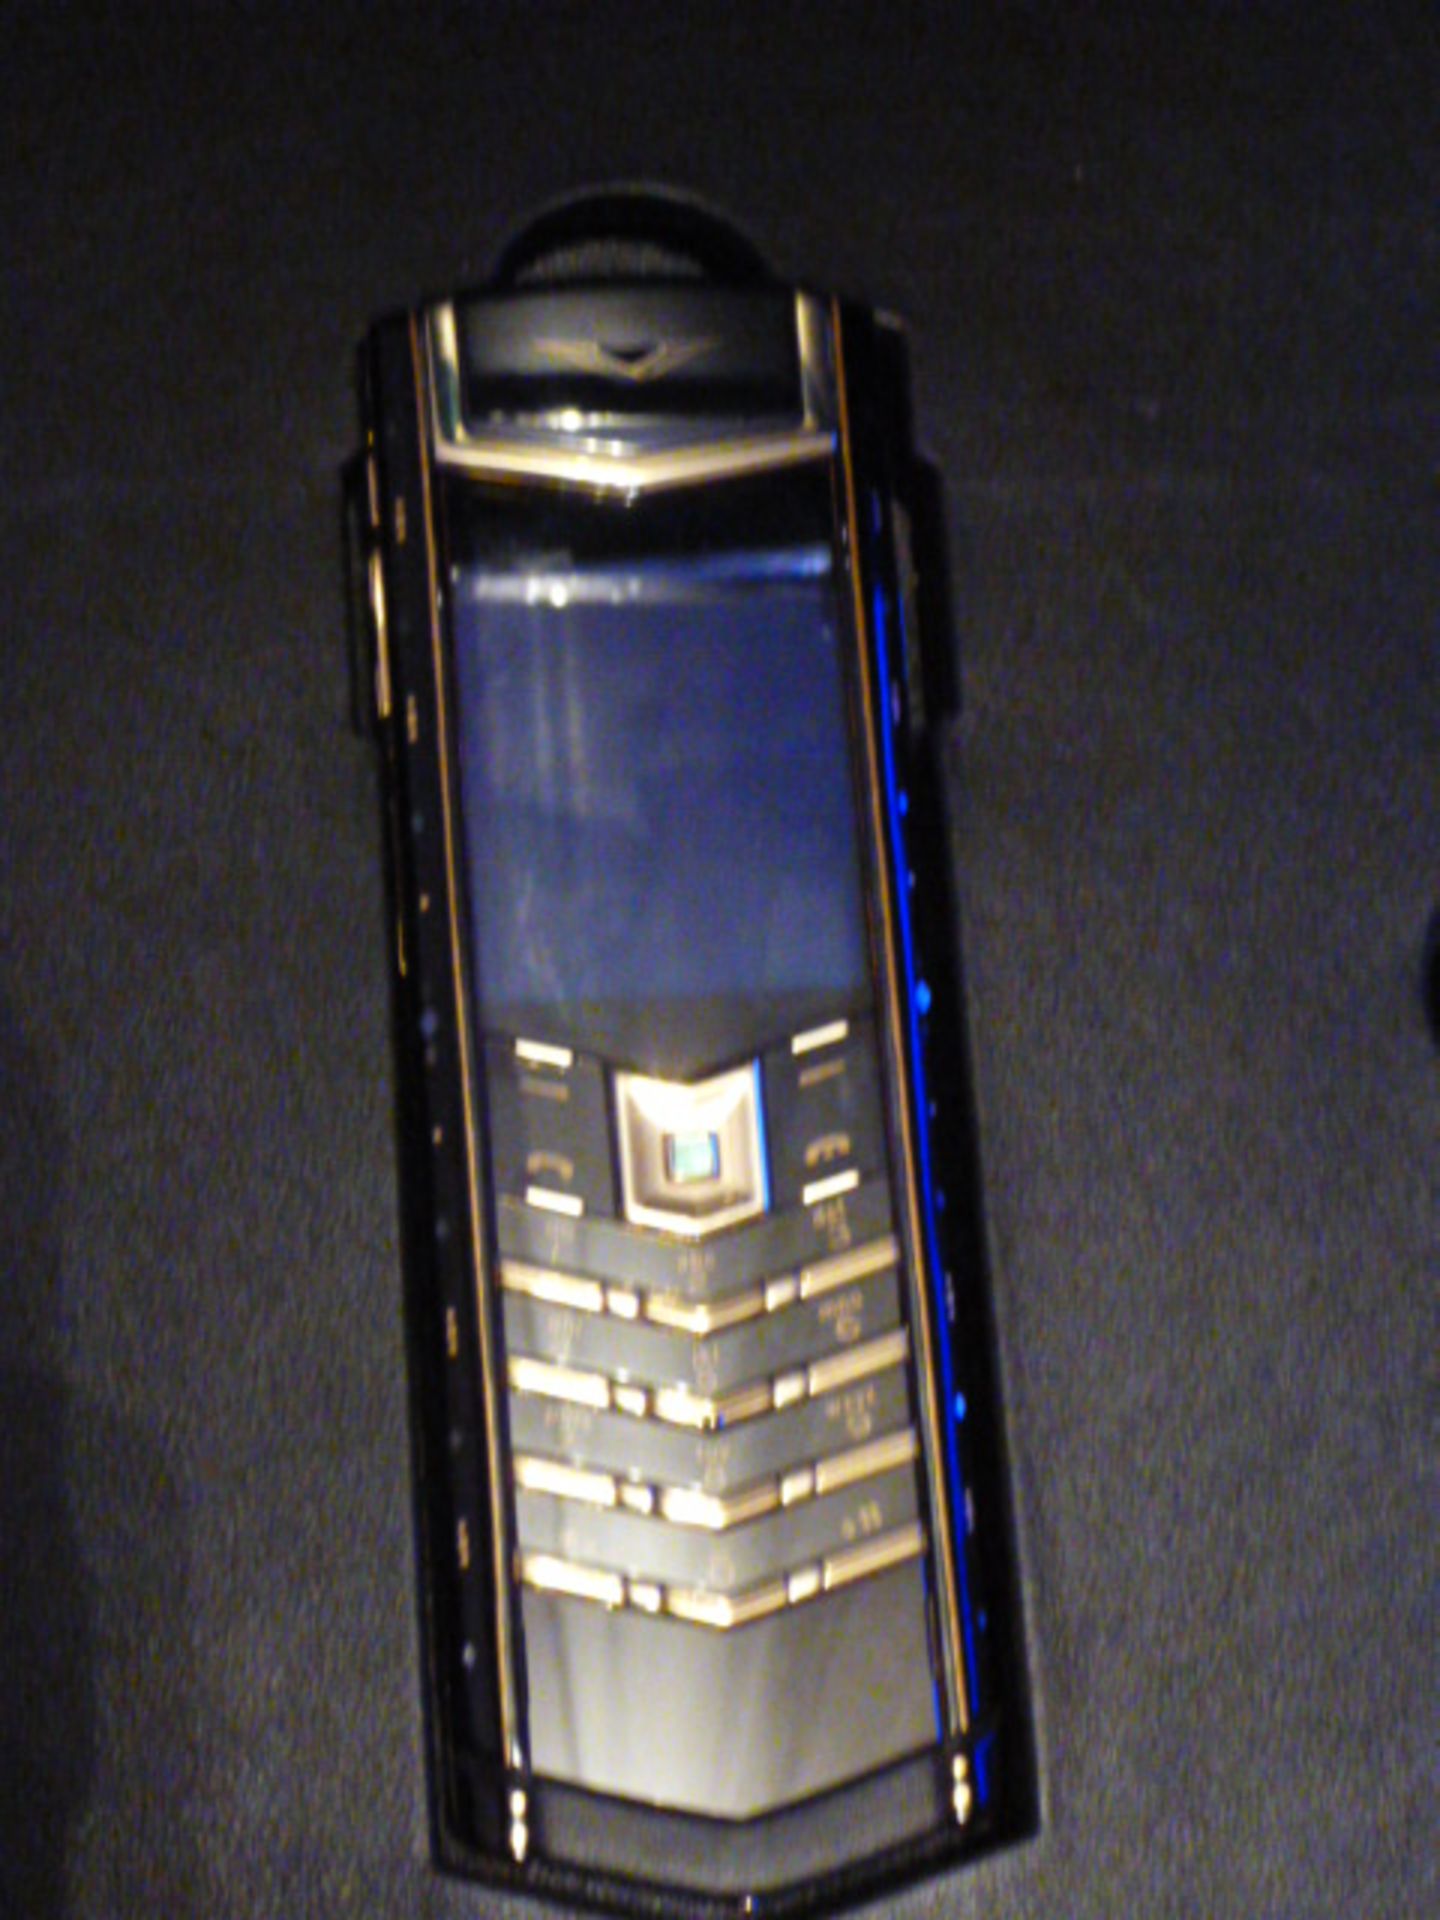 Vertu Signature Harmony Phone, Unique Design 4 of 4. This Handset has been Designed and Created - Image 4 of 8